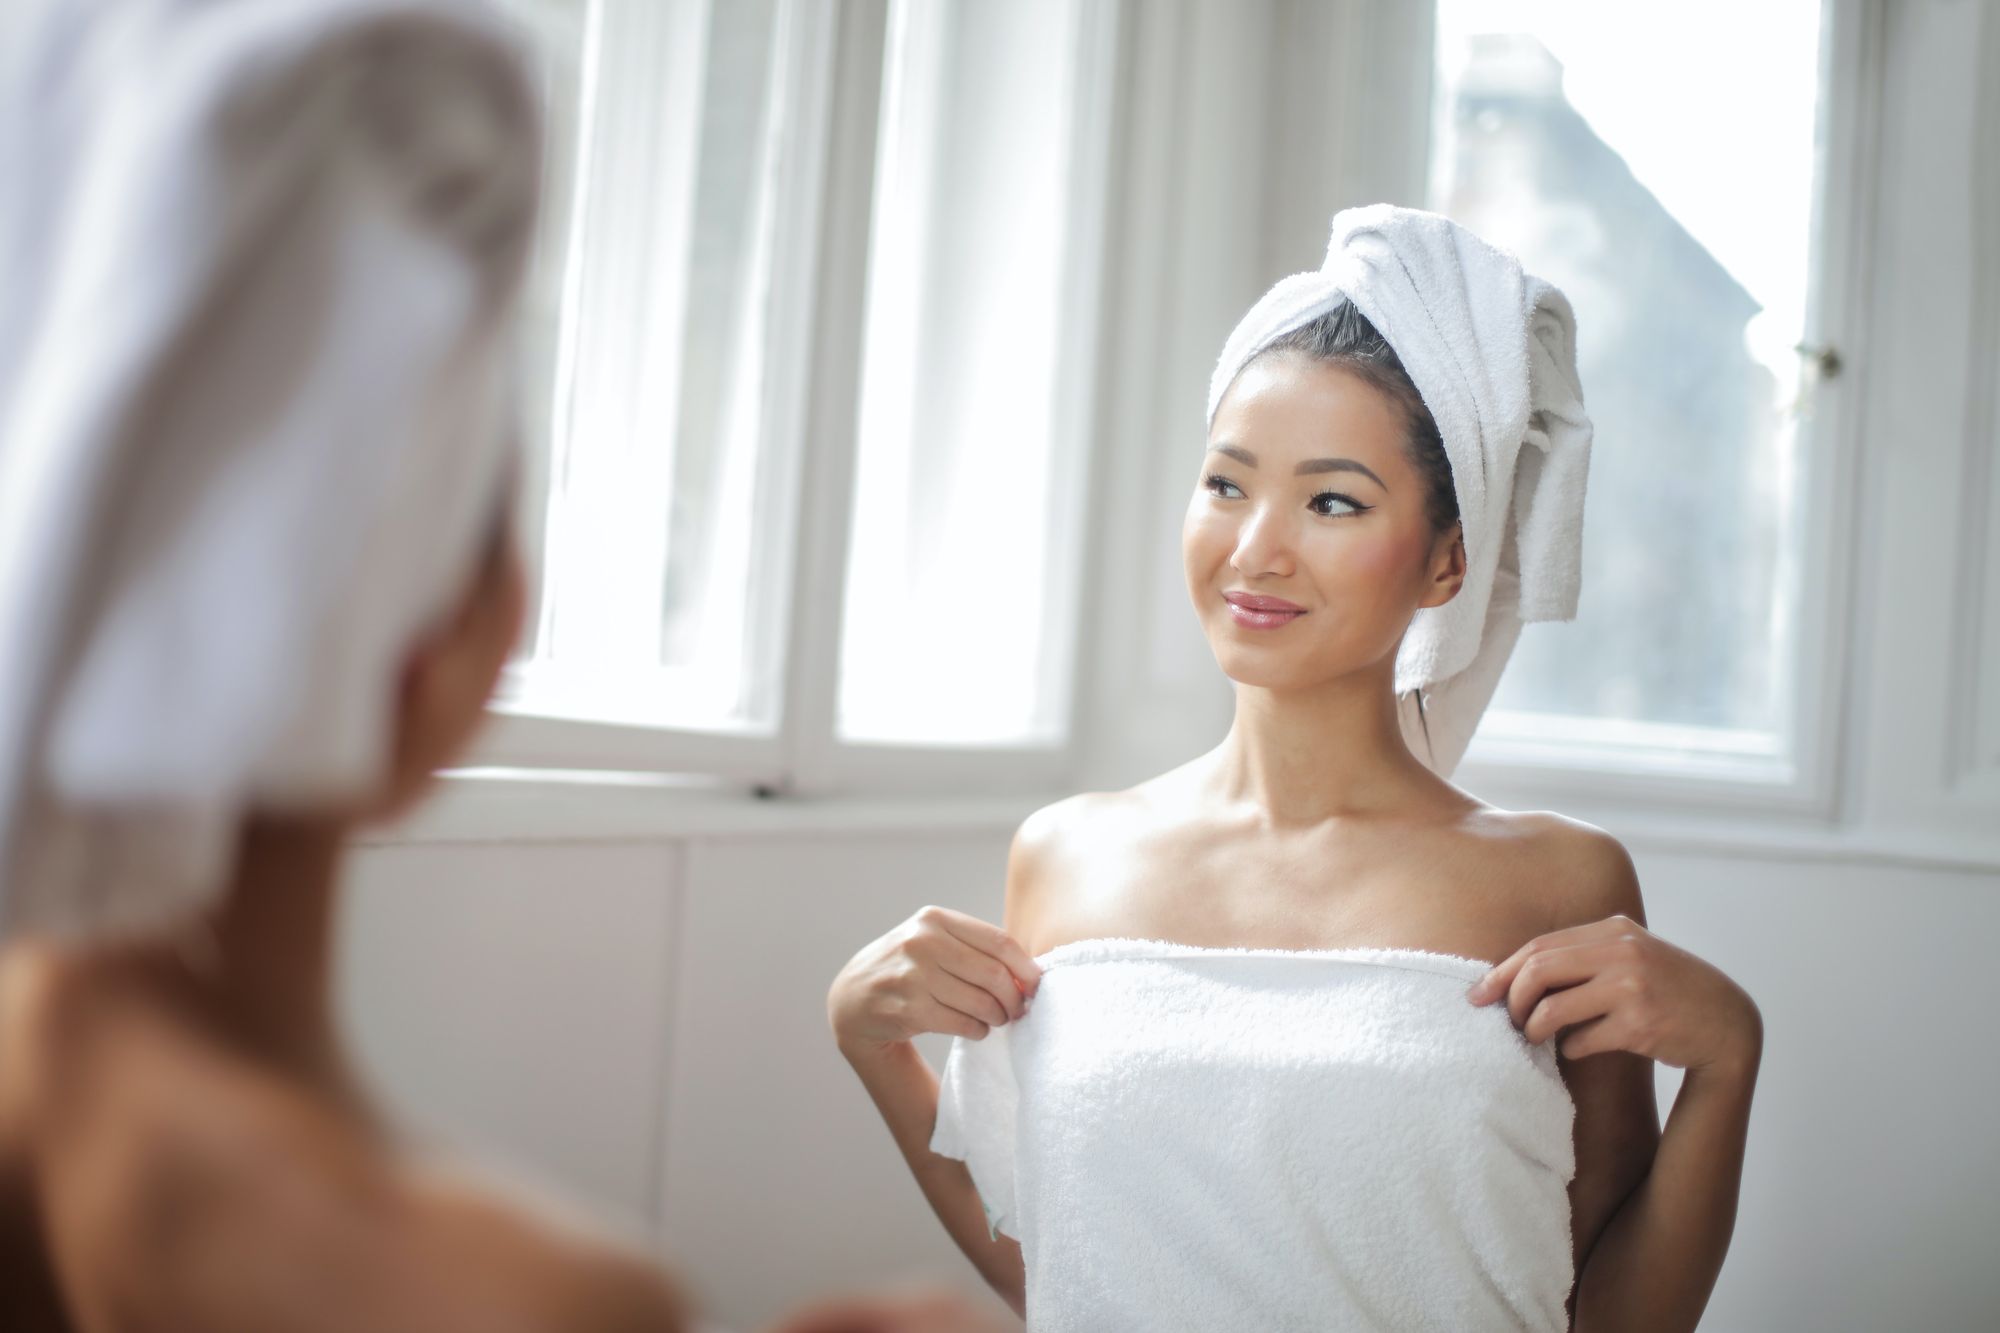 Woman in white towel about to do a breast self-exam.